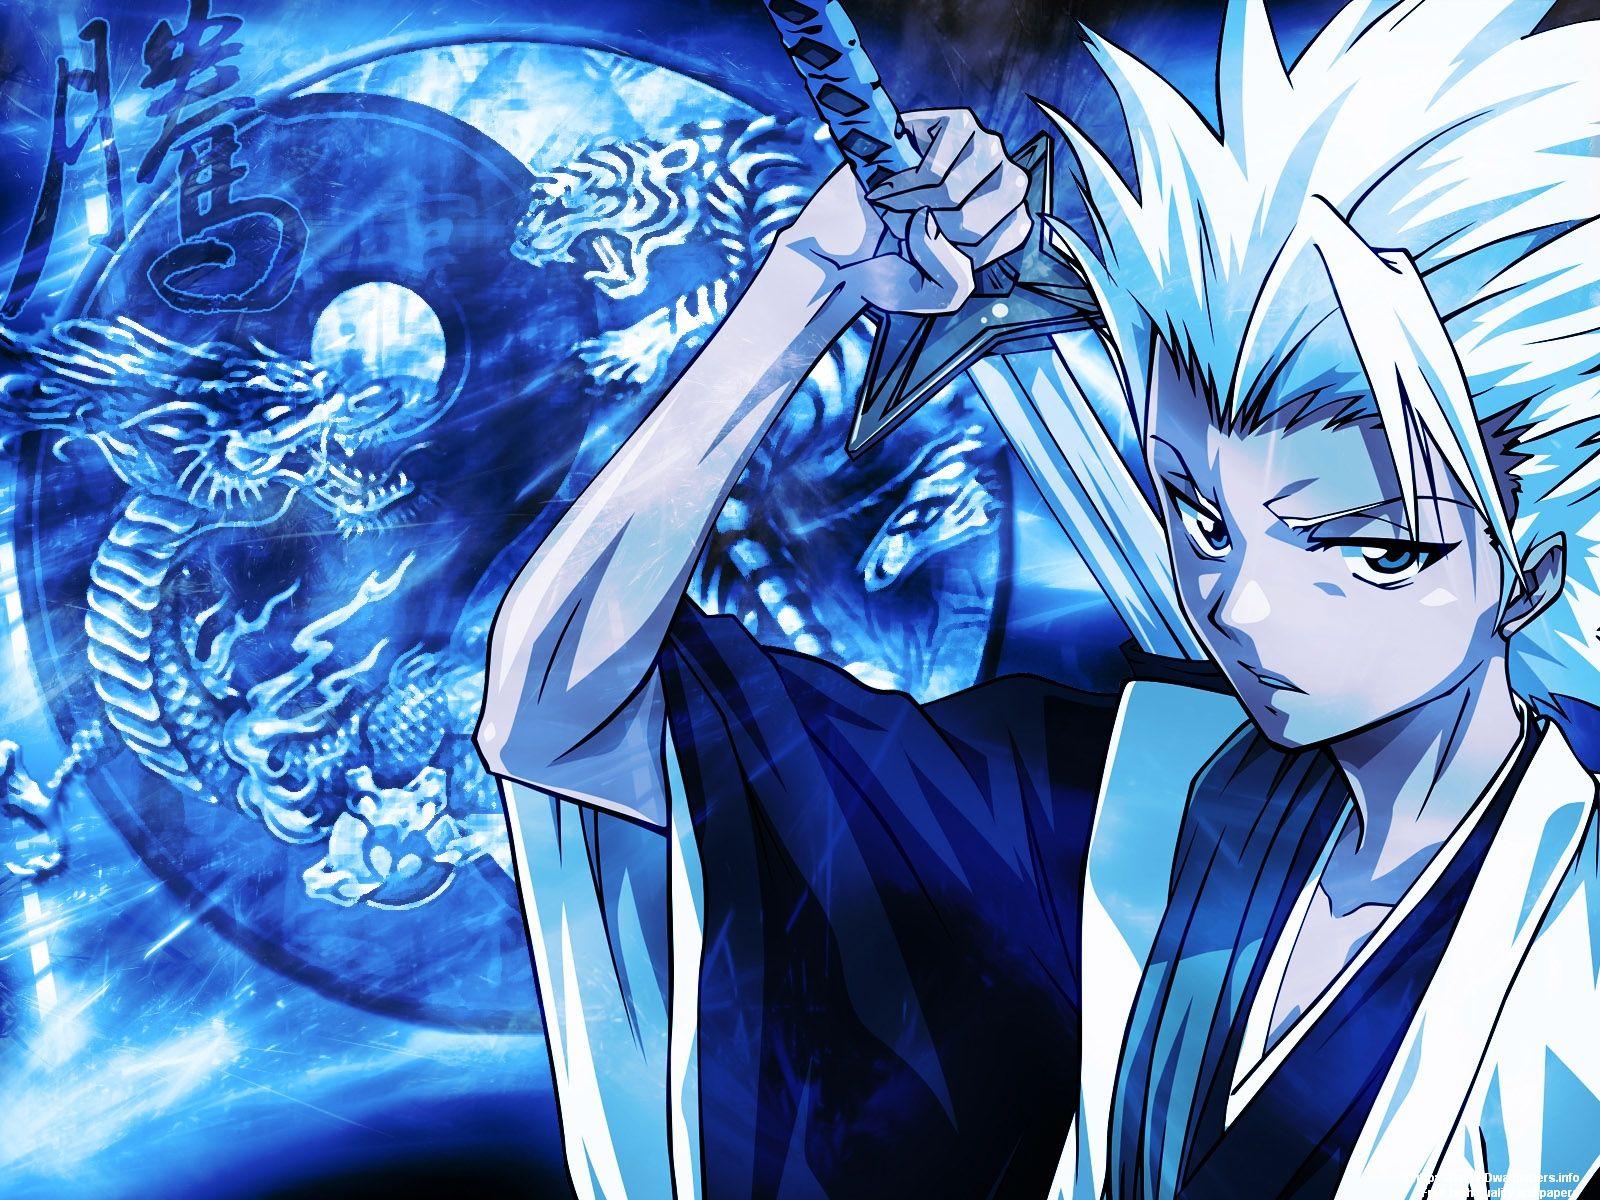 Top 5 Strongest Ice Magic Users in Fairy Tail | Ice magic, Fairy tail,  Fairy tail anime